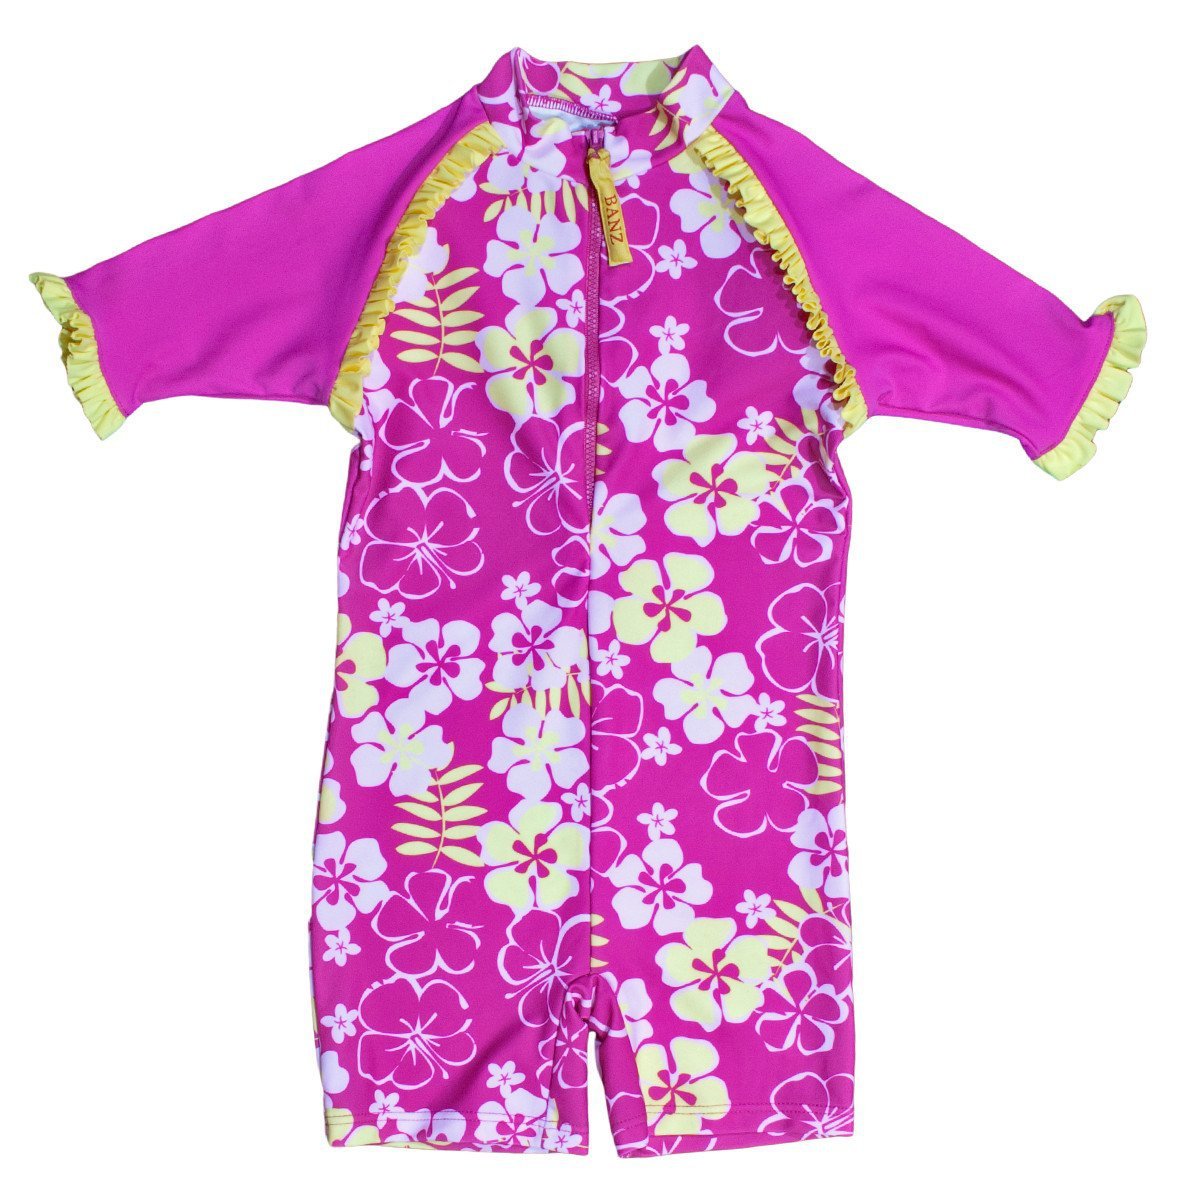 BANZ Swimsuit Baby One Piece Swimsuit 00 / Sun Blossom